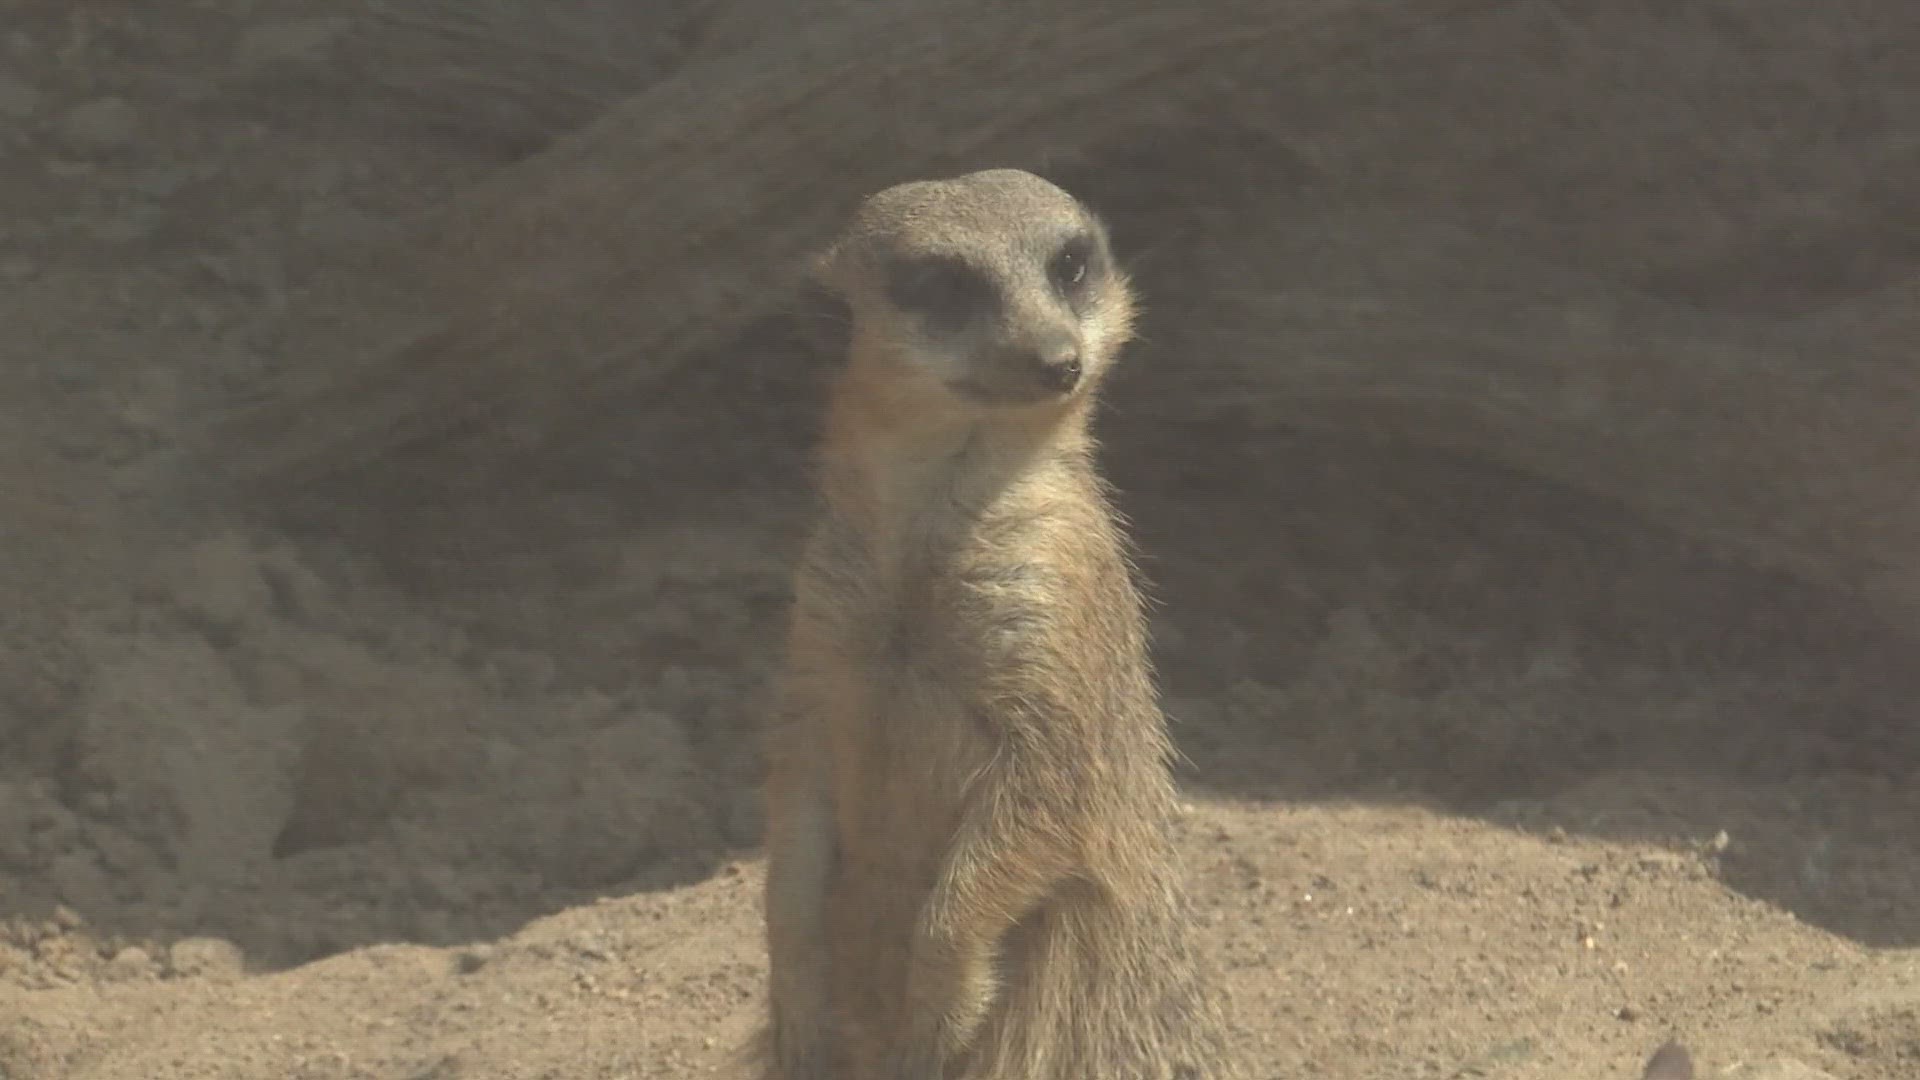 Some of the cutest animals in the world can be found at the Greensboro Science Center. Check out the meerkats!